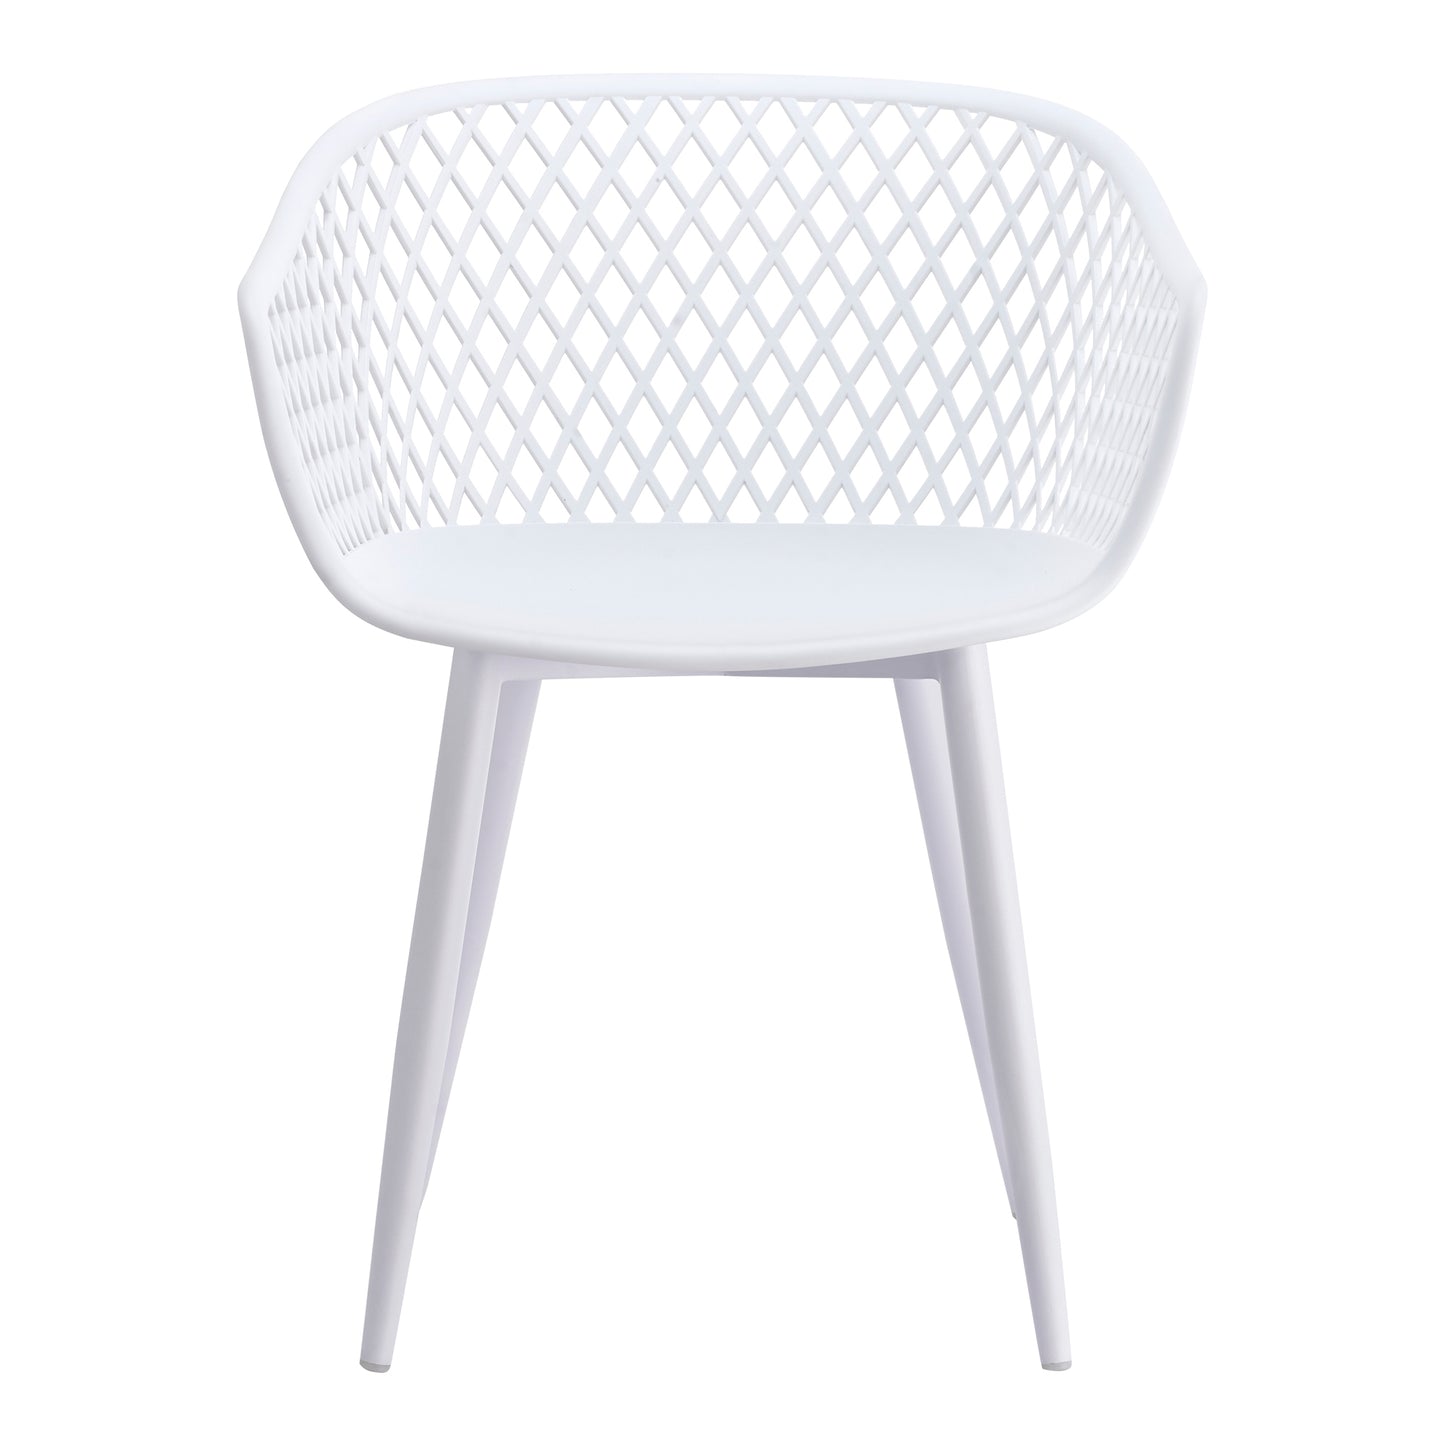 Piazza Outdoor Chair White-M2 QX-1001-18 Sold as 2